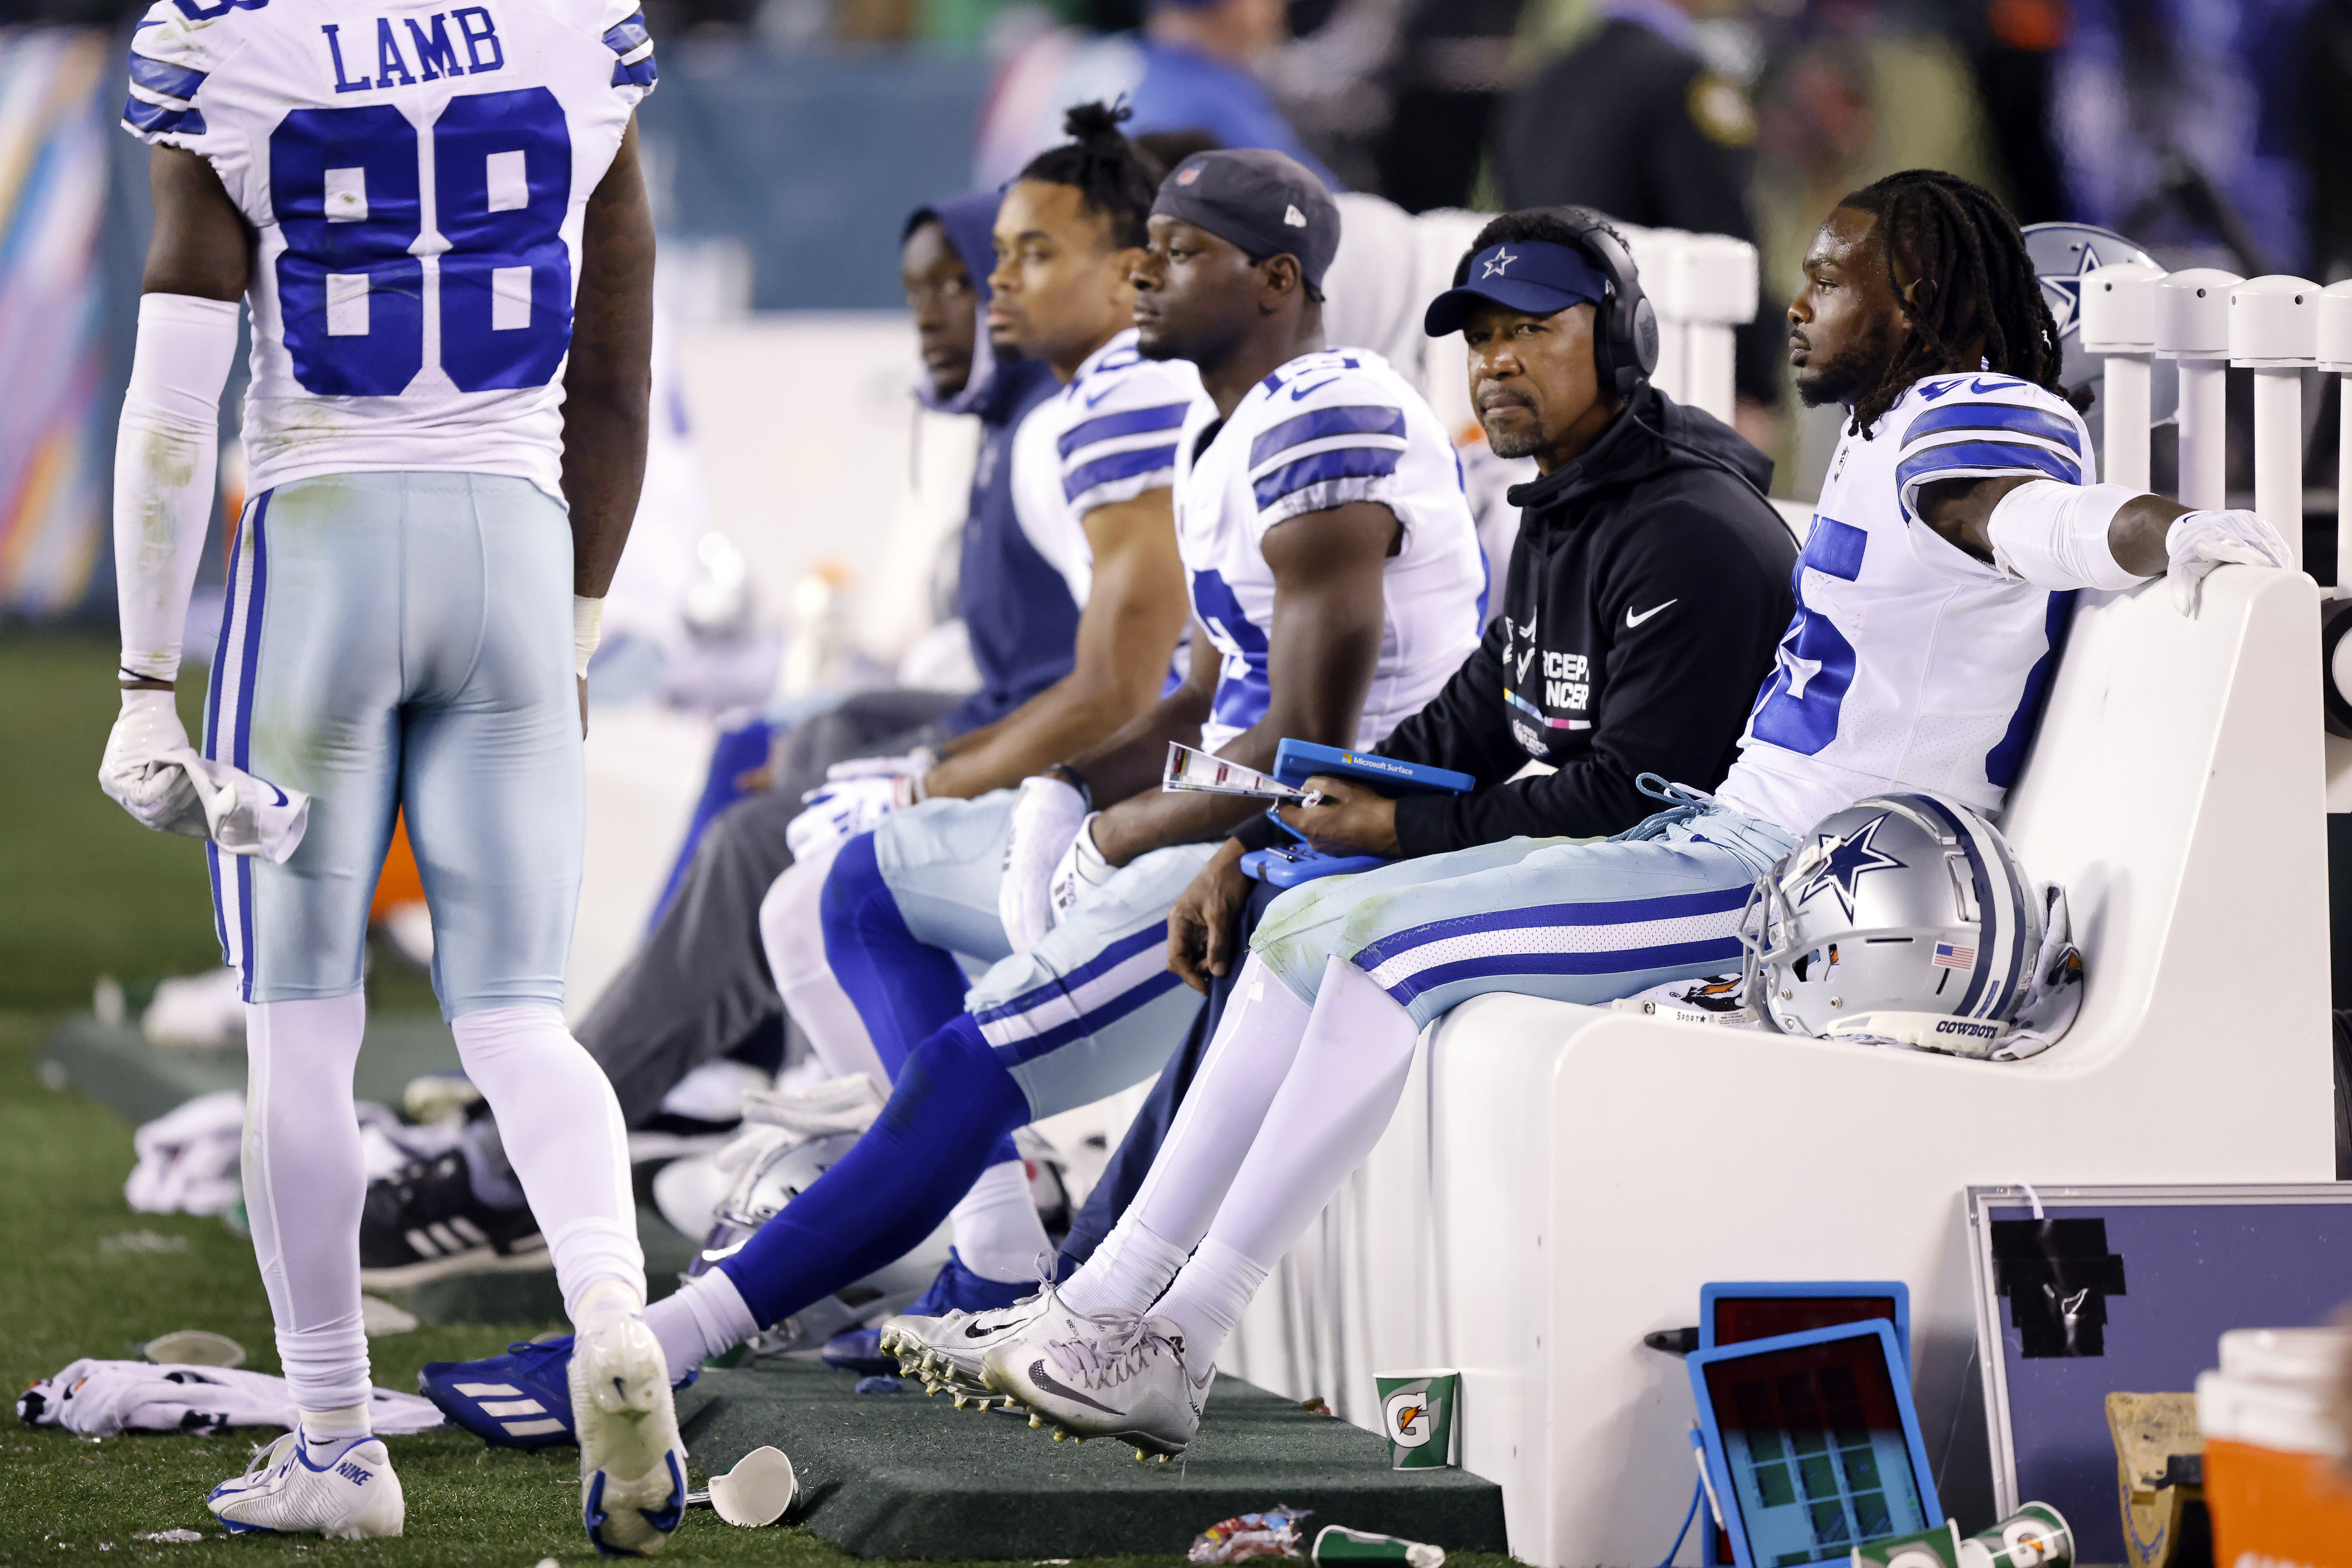 Grading the Cowboys: Dallas' flaws shine through in division loss